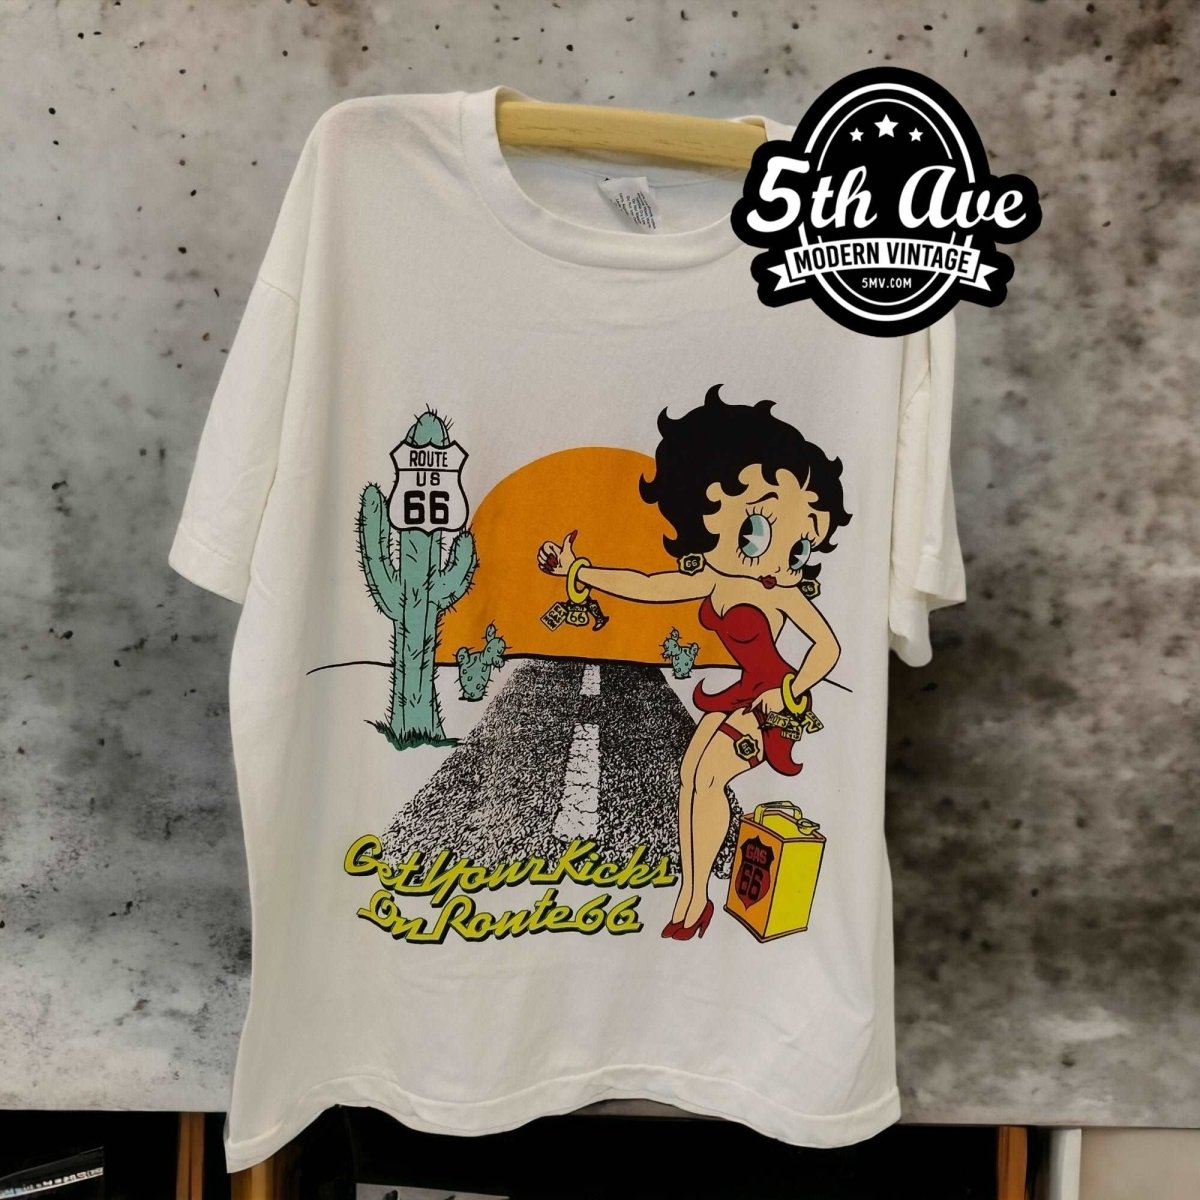 Betty Boop Get Your Kicks On Route 66 - Vintage Band Shirts